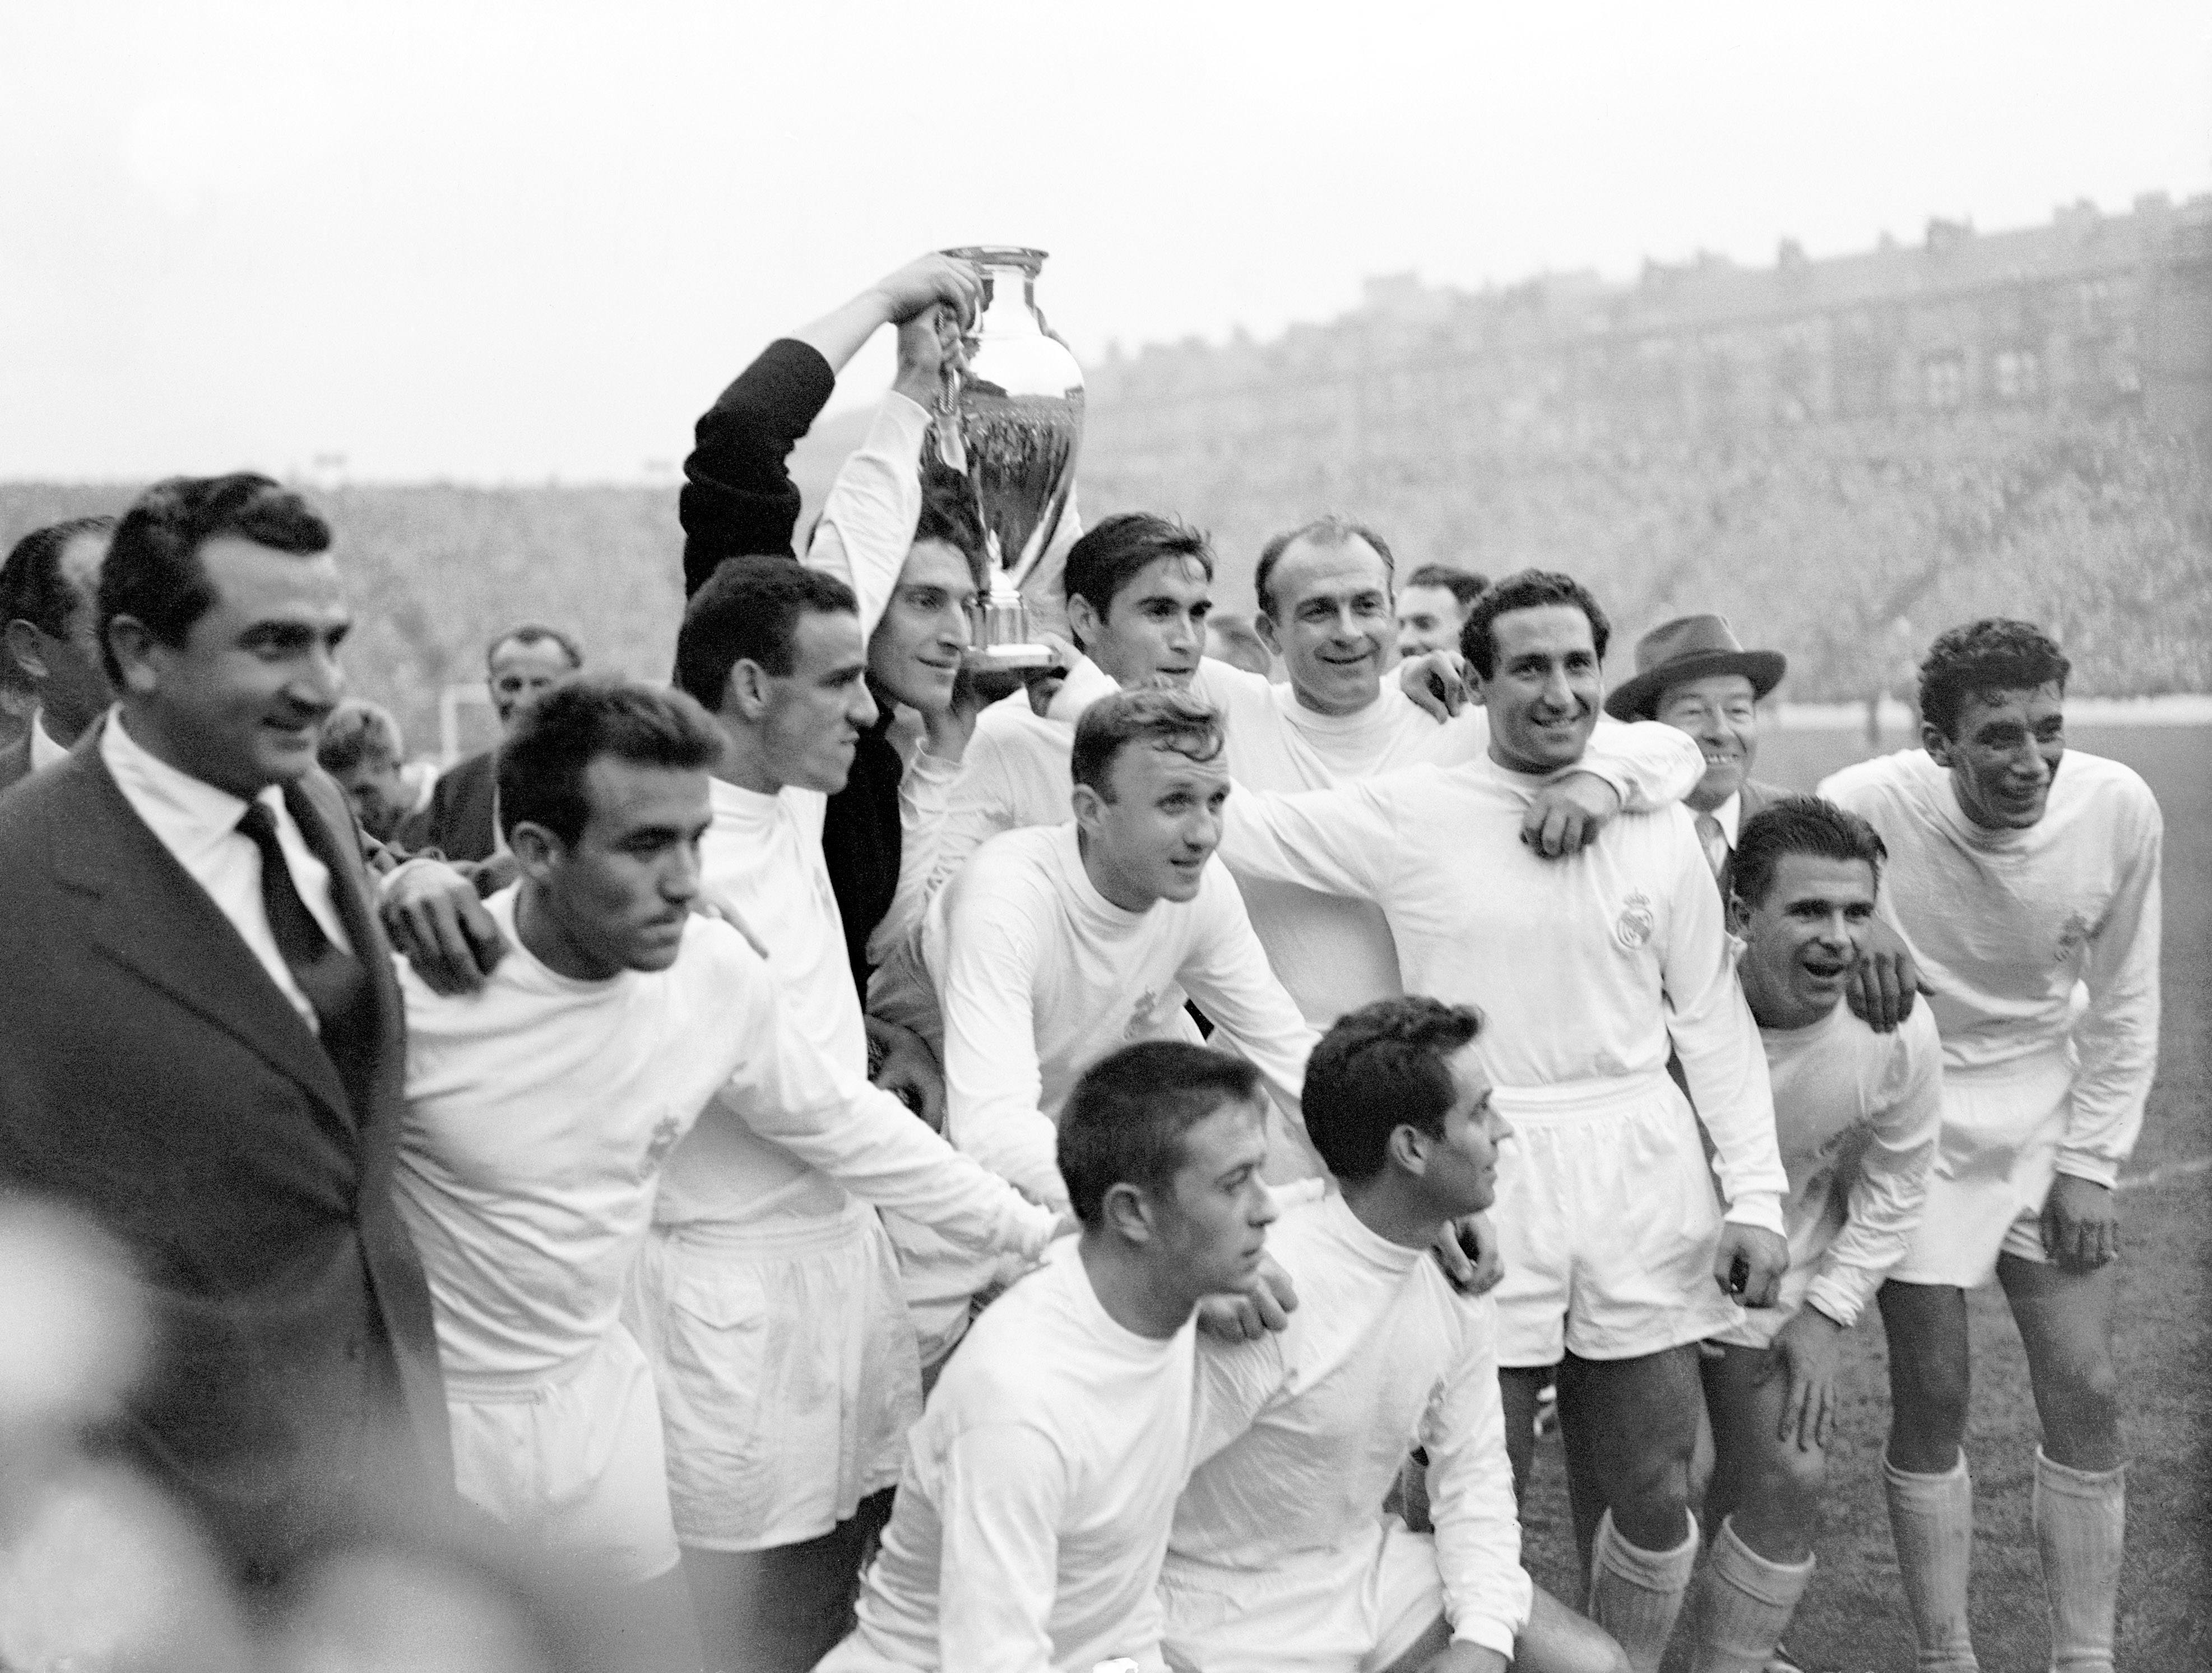 Soccer - European Cup - Final - Real Madrid v Eintracht Frankfurt Real Madrid celebrate with the European Cup after winning the trophy for the fifth successive year: (standing, l-r) Luis Del Sol, Canario, Dominguez, Jose Santamaria, Marquitos, Alfredo Di Stefano, Francisco Gento, Ferenc Puskas, Enriqe Pachin; (squatting, l-r) Vidal, Jose Zarraga Date: 18/05/1960